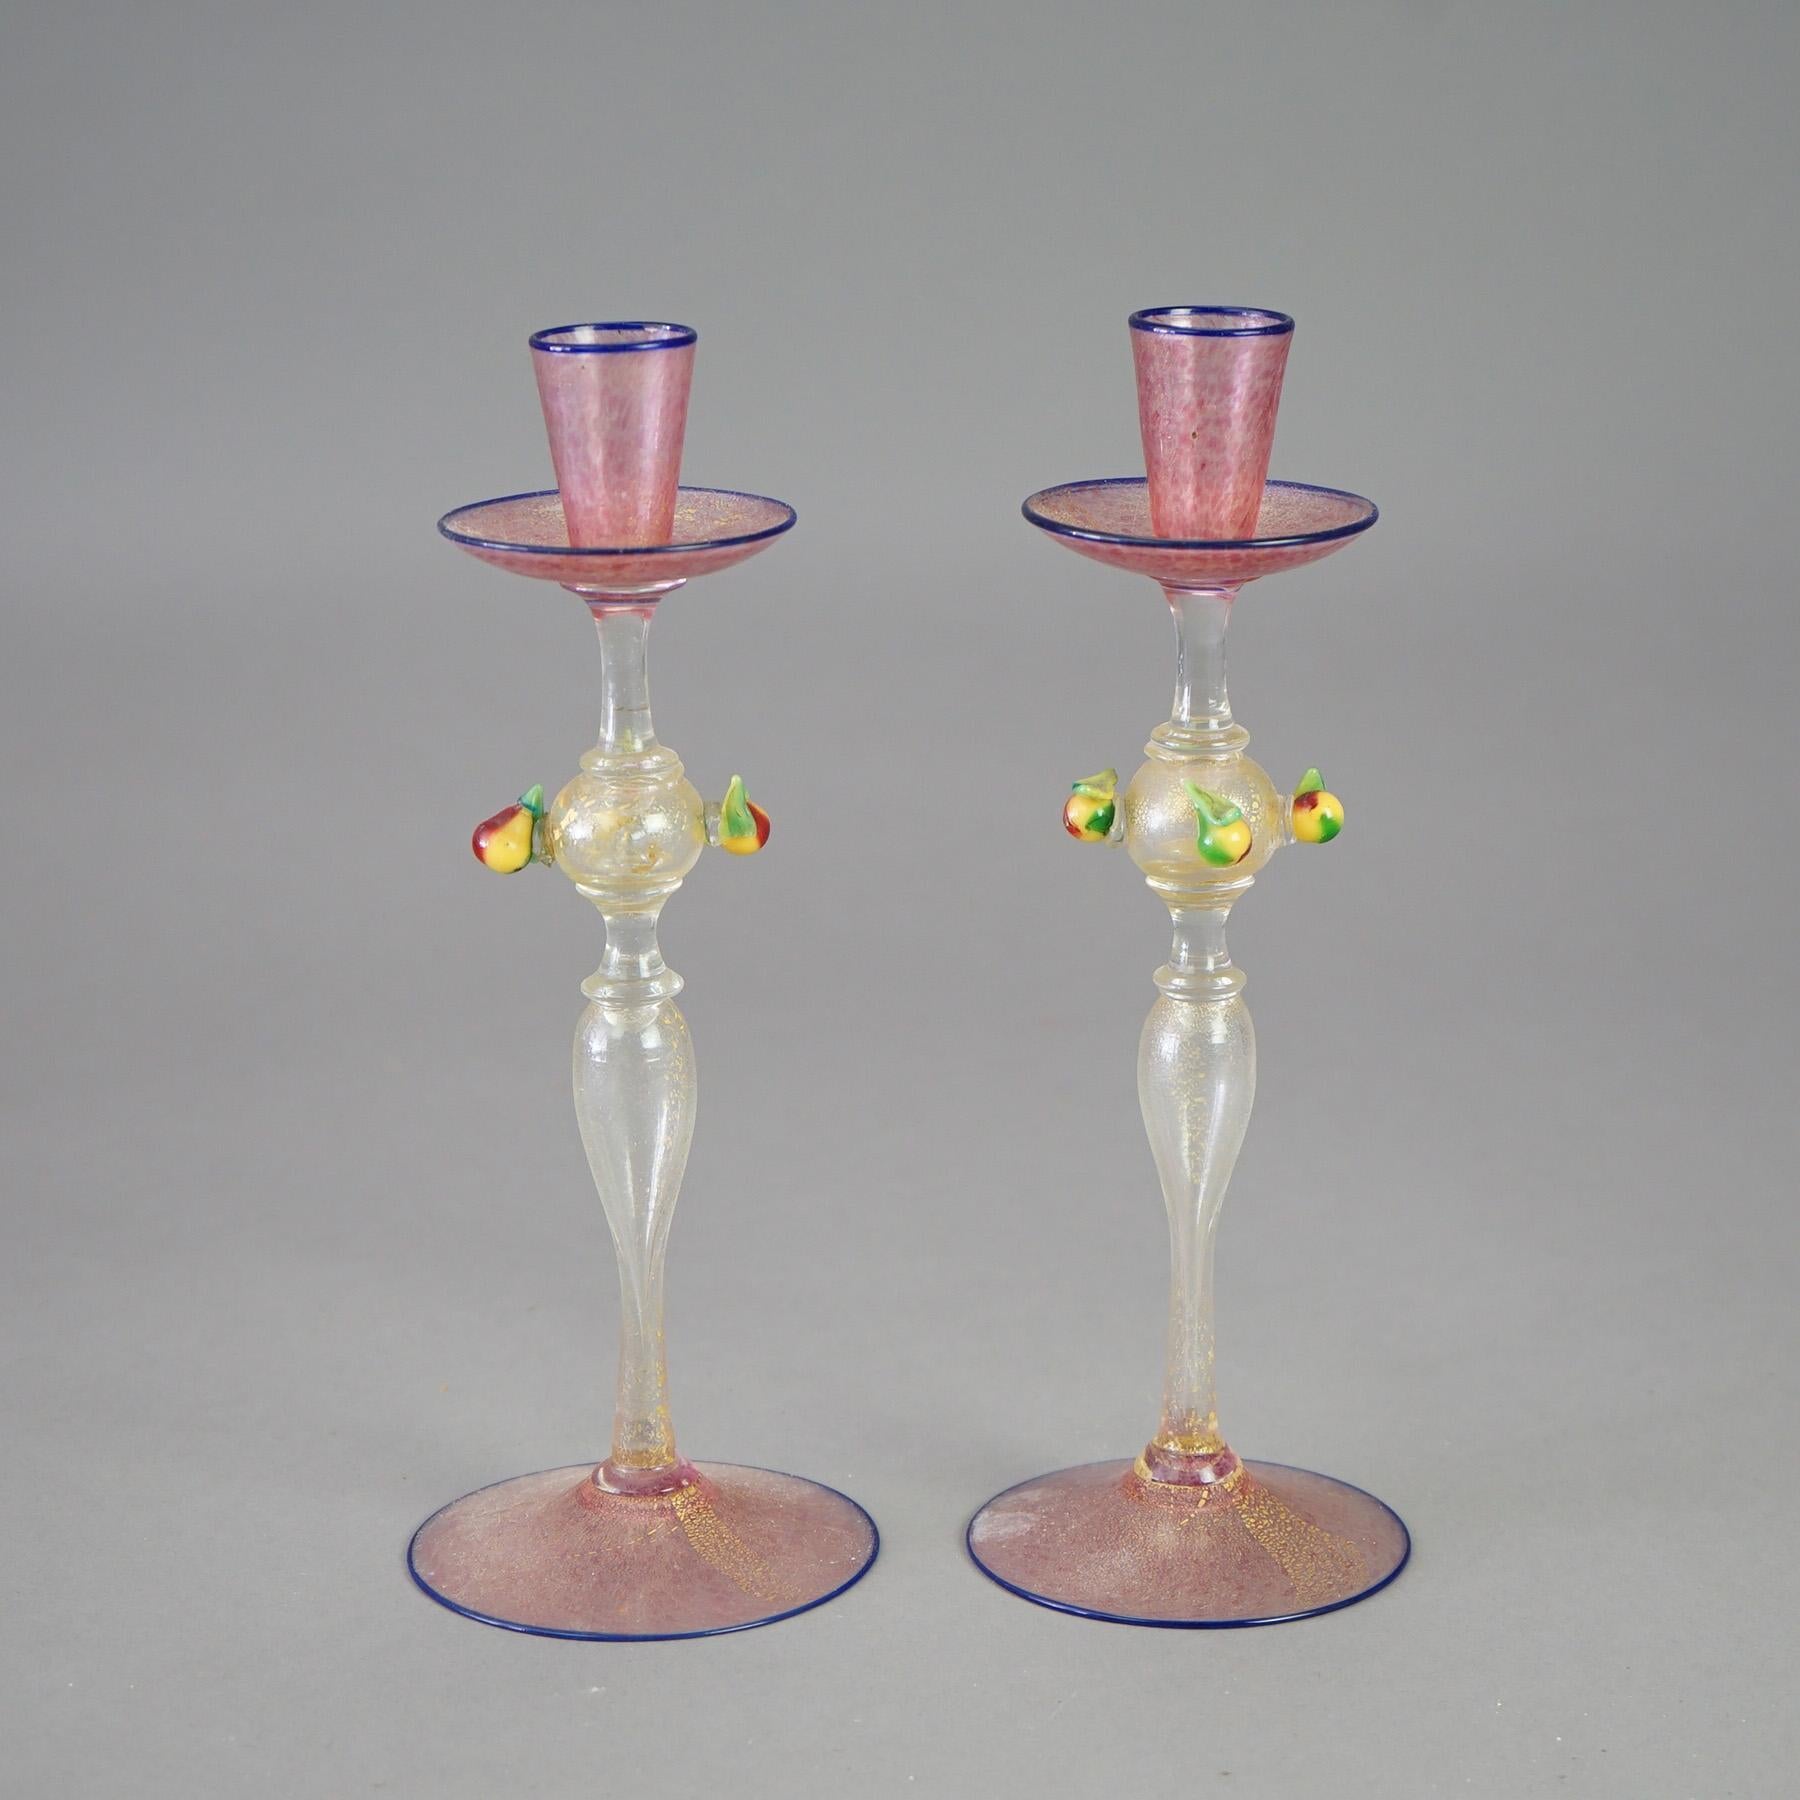 Italian Antique Pair of Venetian Murano Art Glass Candlesticks with Pears Circa 1920 For Sale